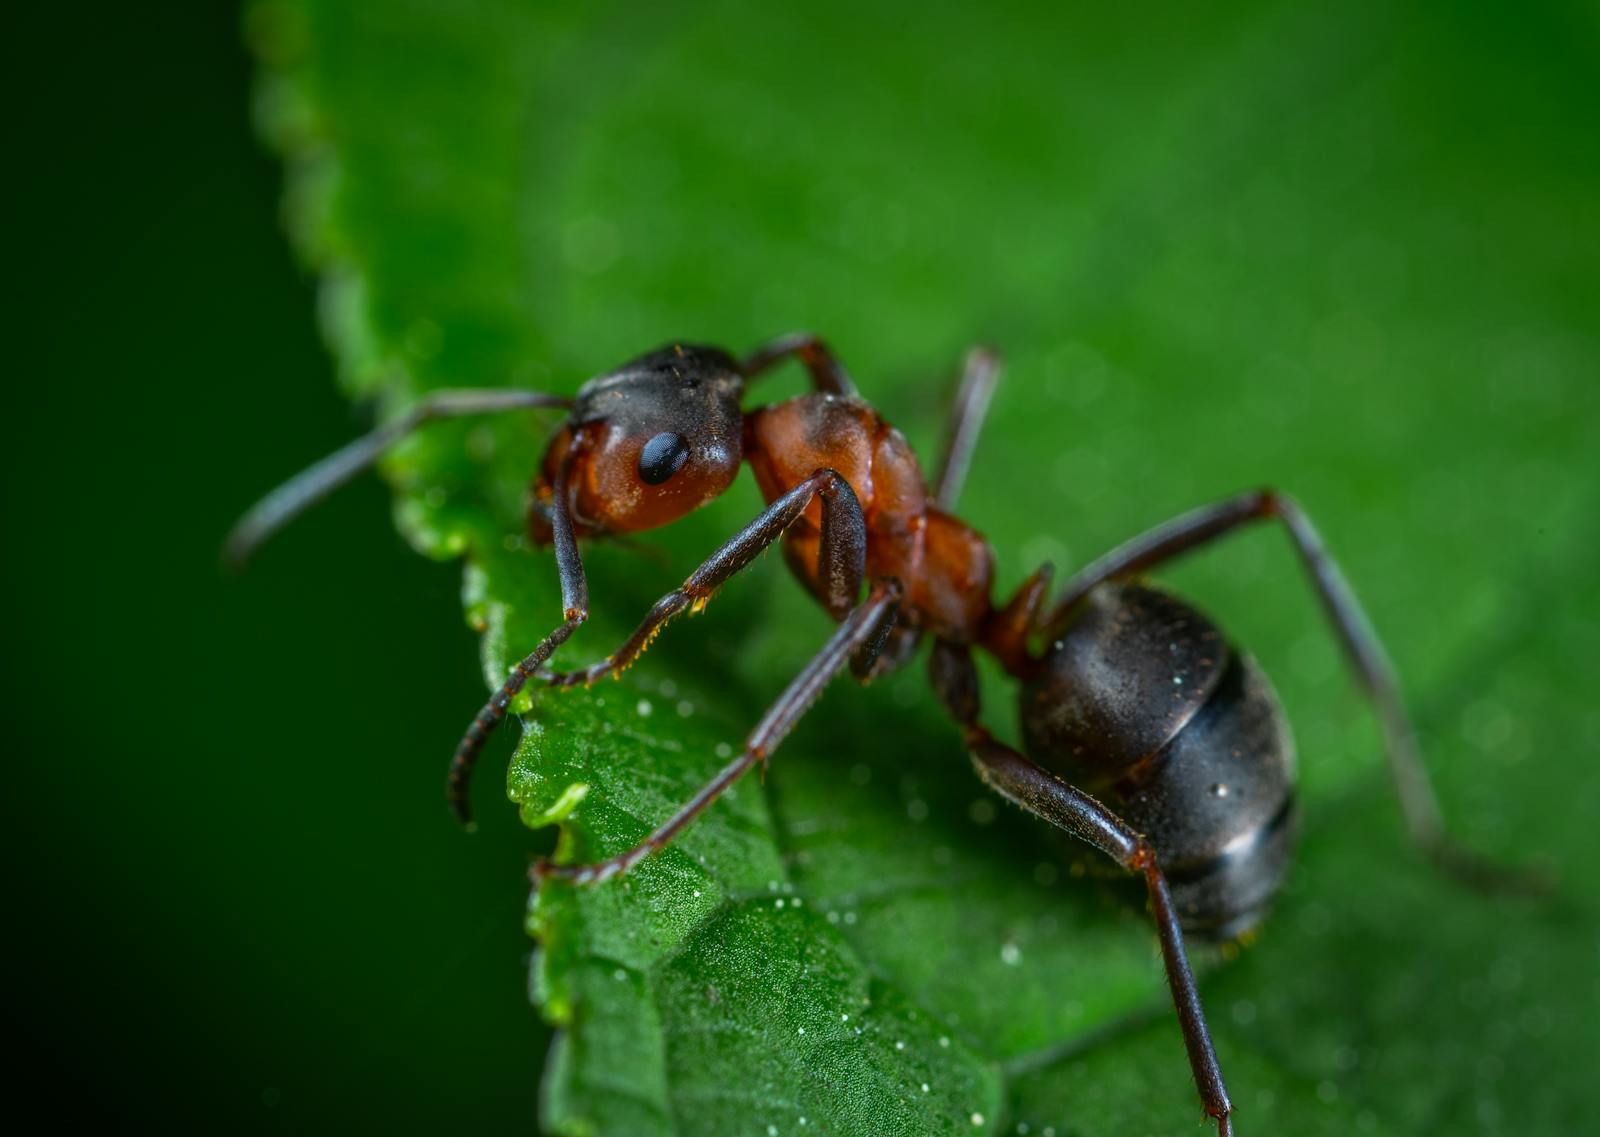 ant Photo by Egor Kamelev from Pexels: https://www.pexels.com/photo/macro-photography-of-red-ant-1104974/